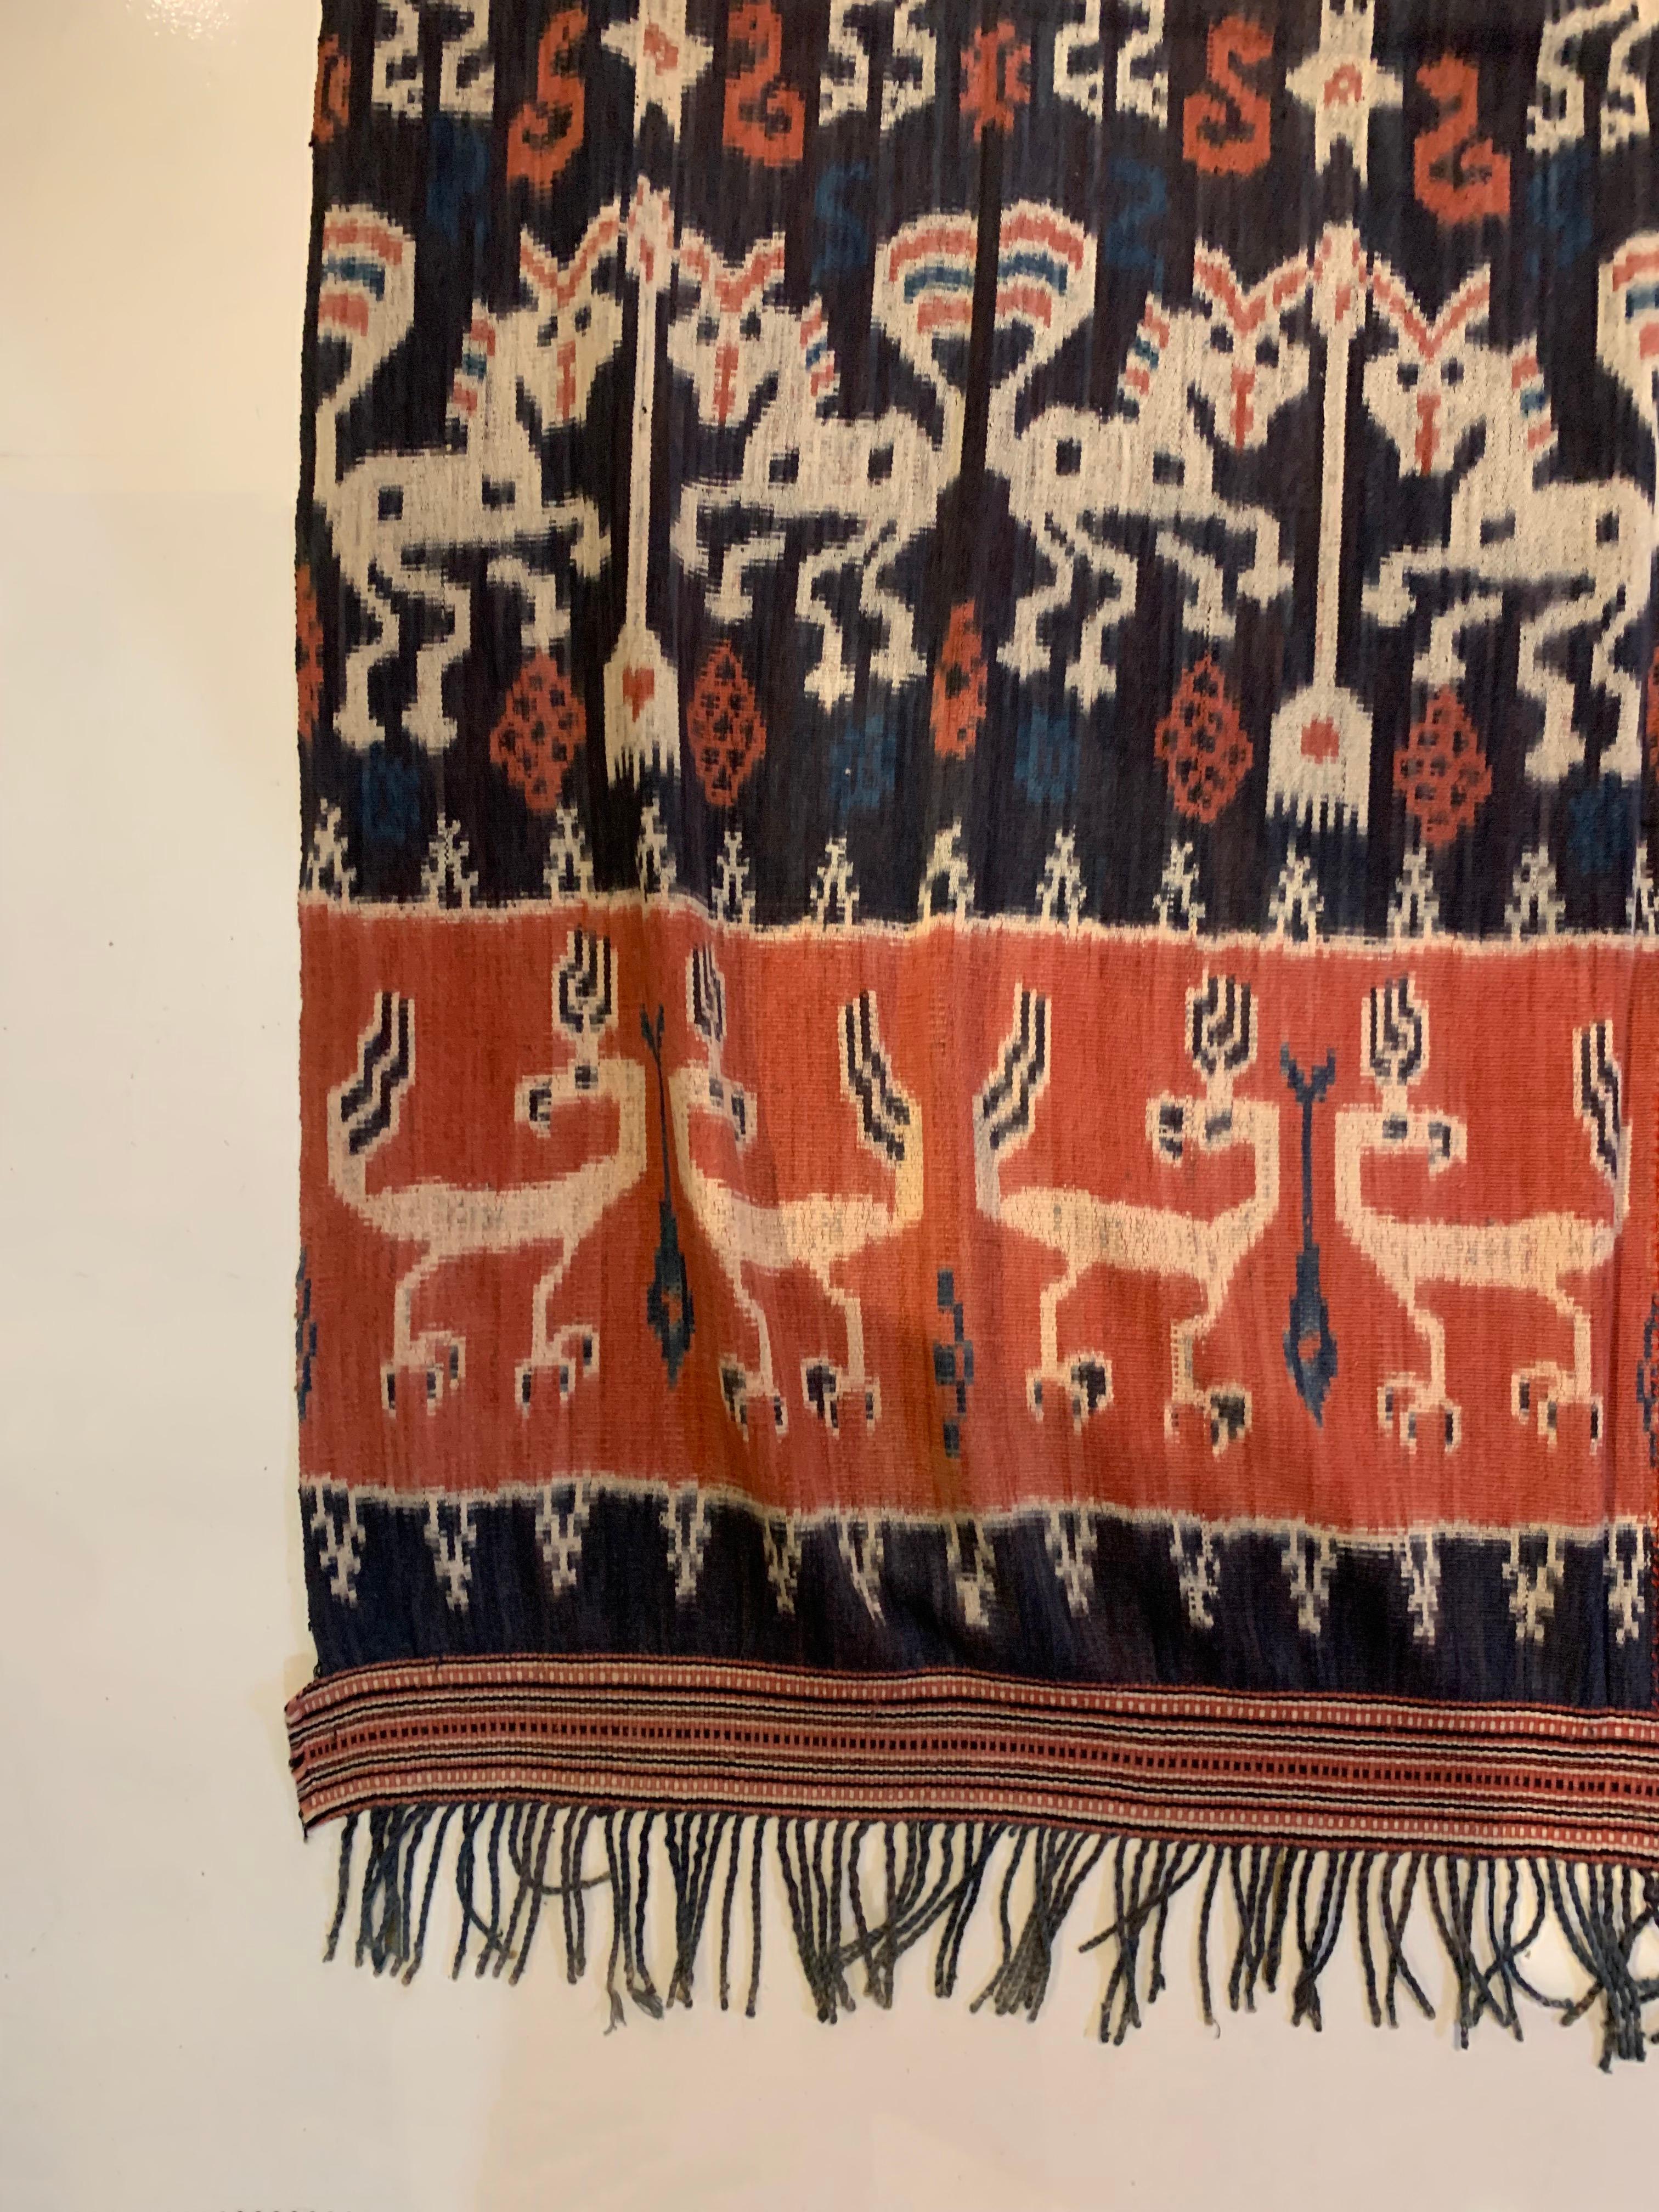 This Ikat textile originates from the Island of Sumba, Indonesia. It is hand-woven using naturally dyed yarns via a method passed on through generations. It features a stunning array of distinct tribal patterns and motifs. Motifs include chickens &